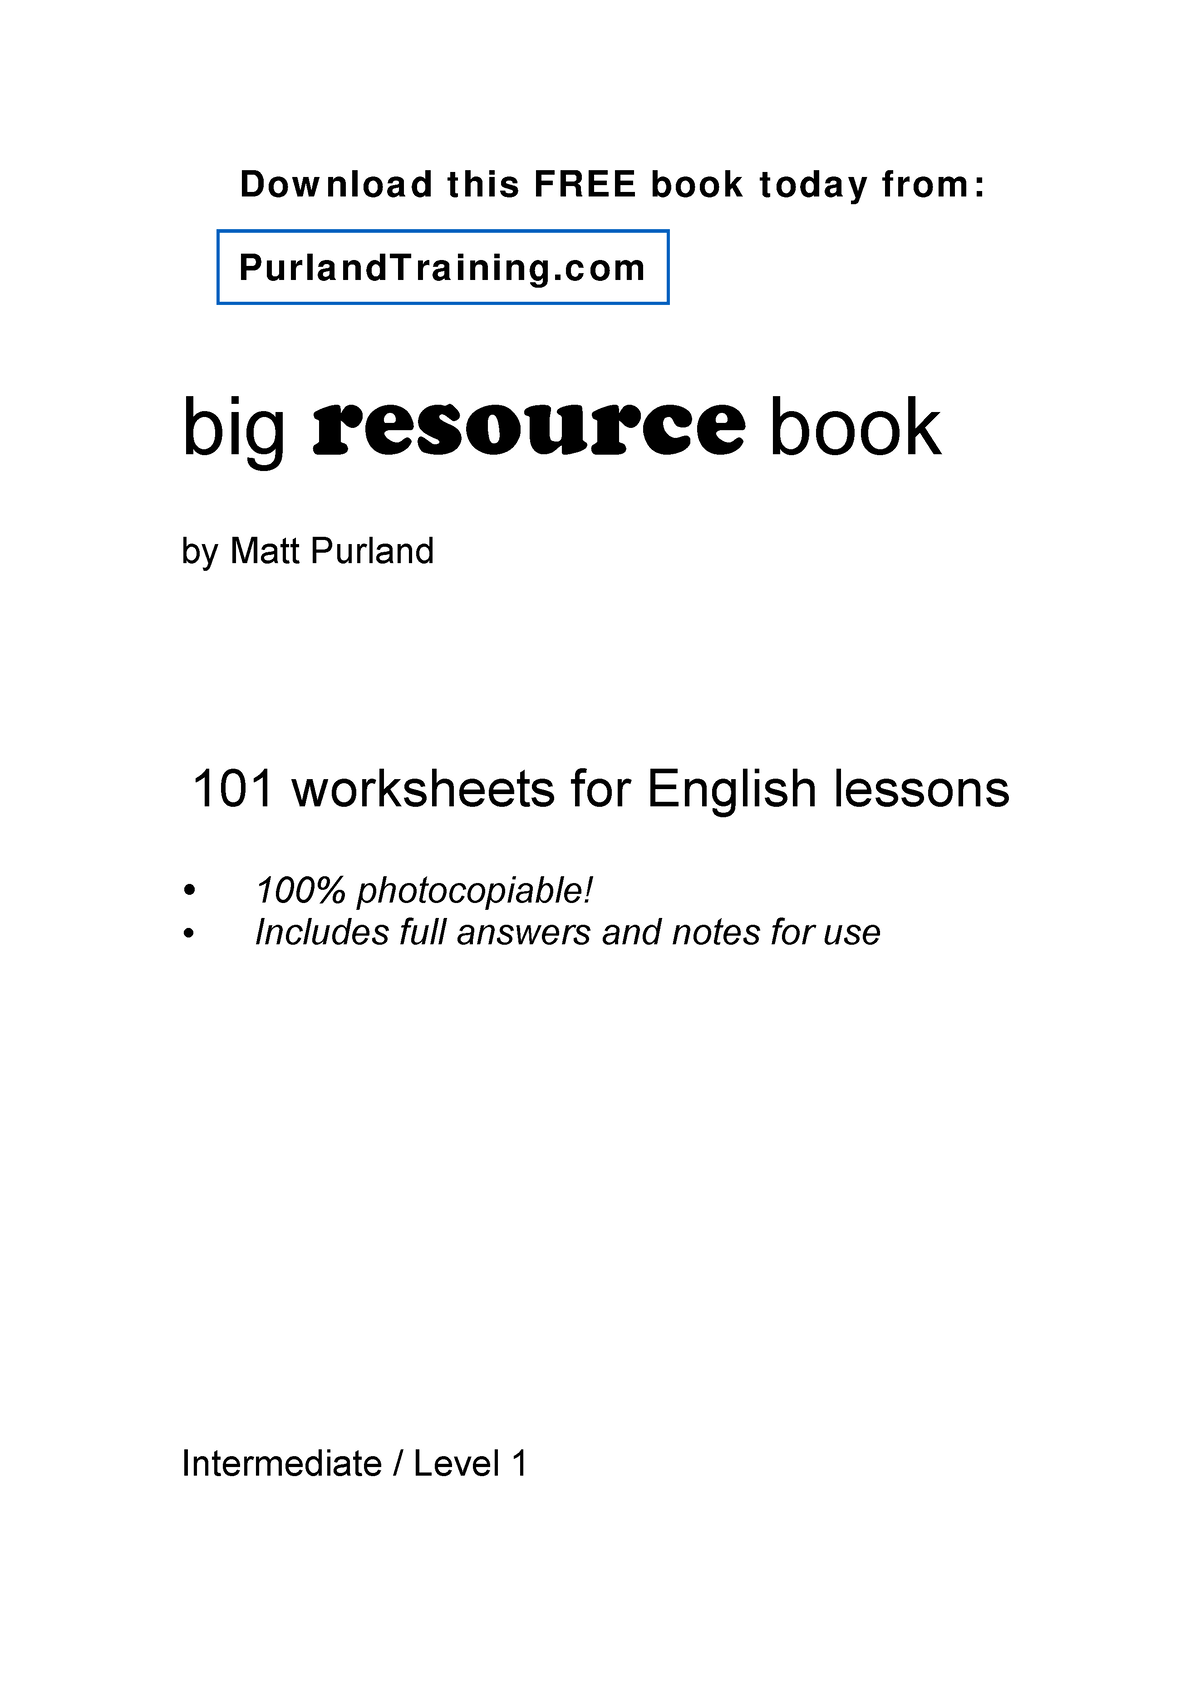 english-big-resource-book-big-resource-book-by-matt-purland-101-worksheets-for-english-lessons